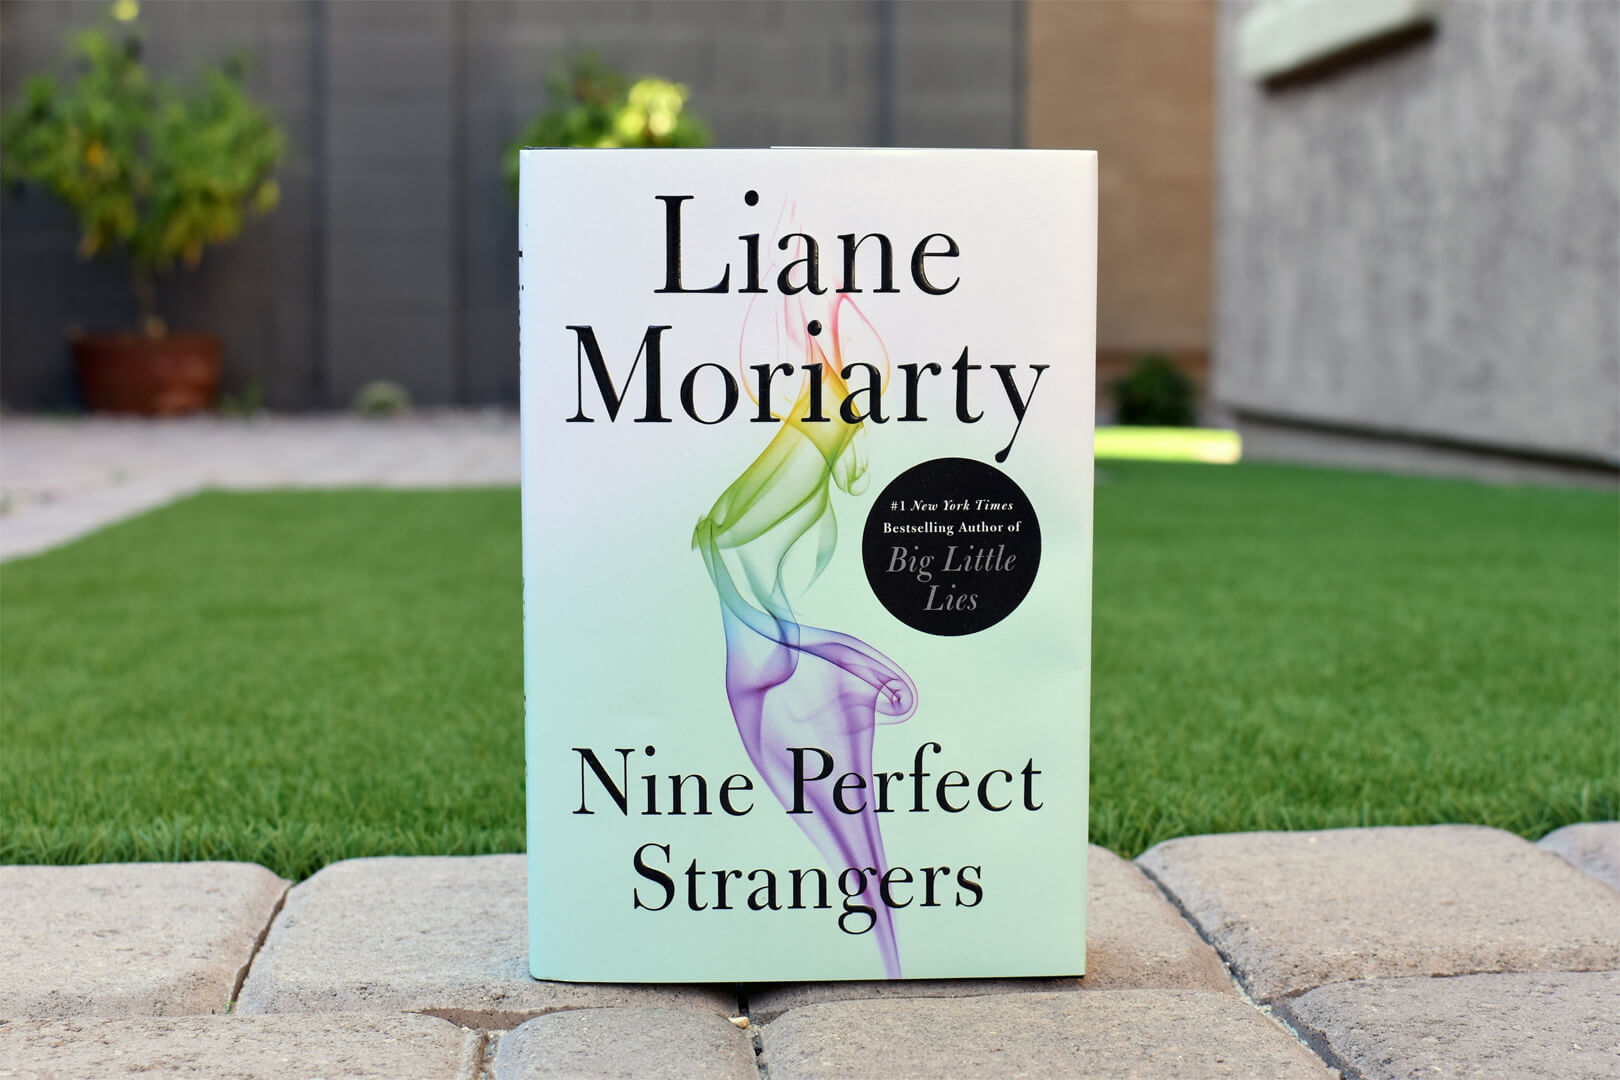 Book Club Questions for Nine Perfect Strangers by Liane Moriarty